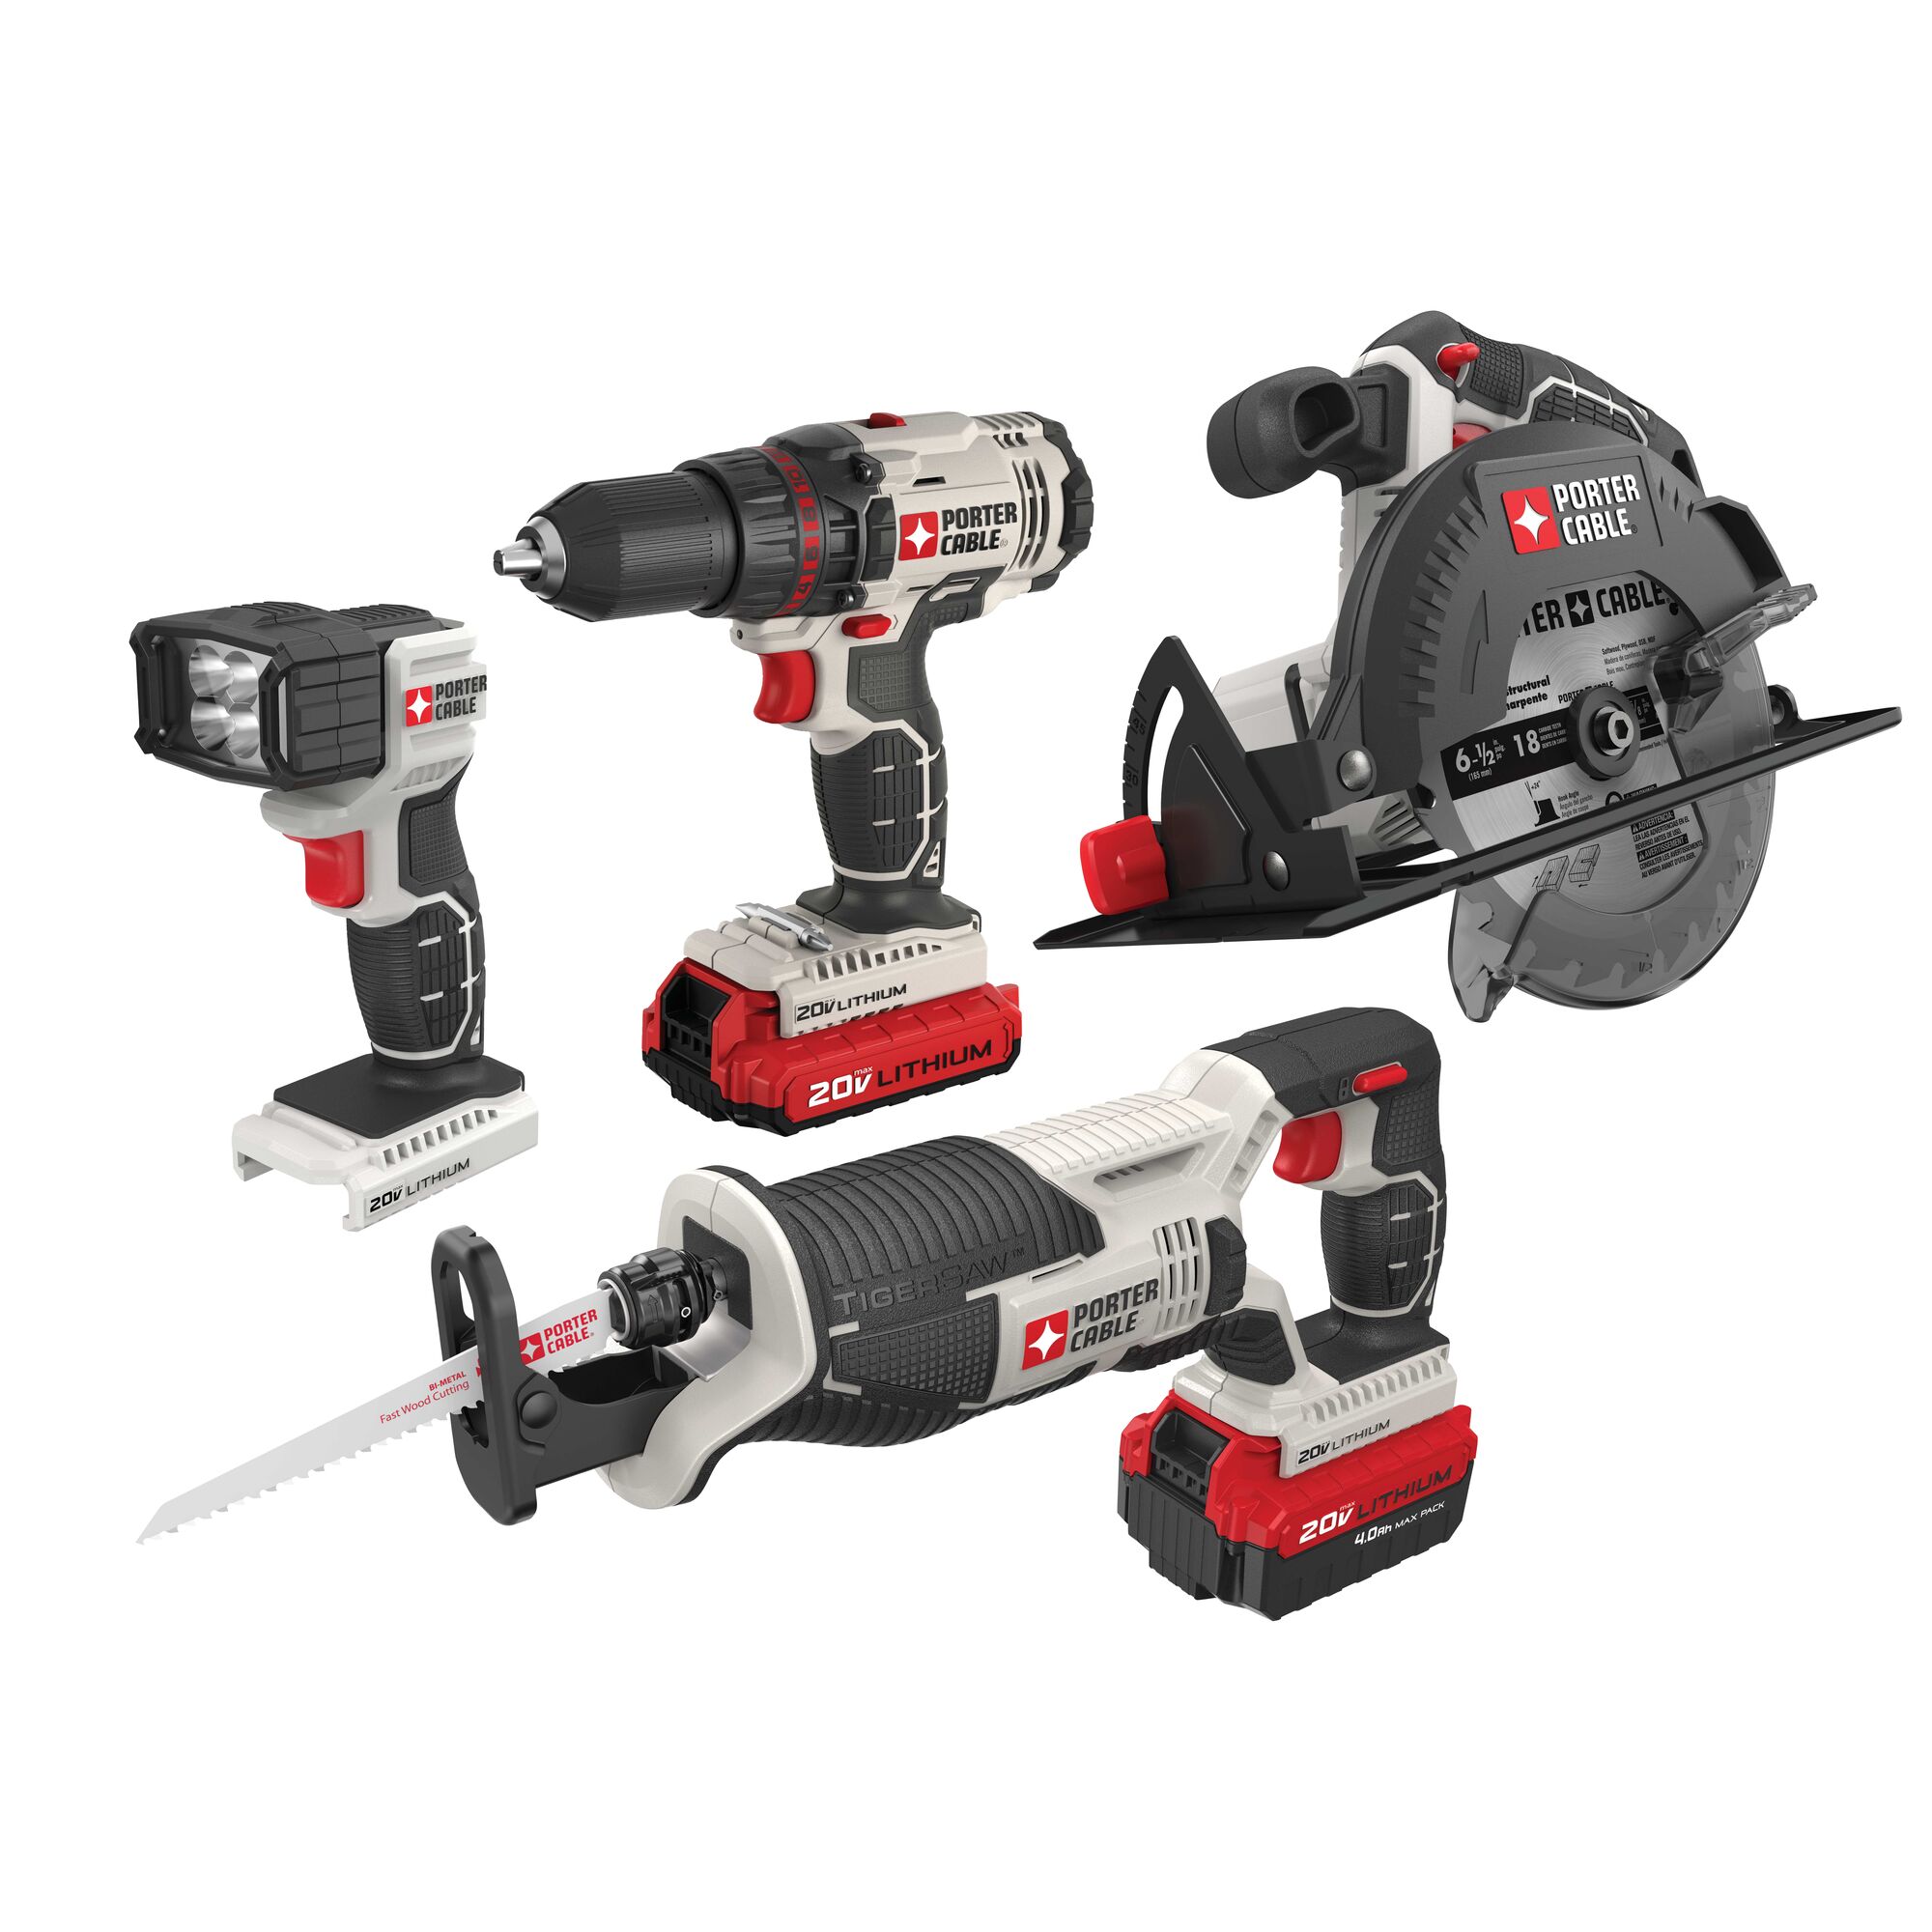 PORTER-CABLE 4-Tool 20-volt Max Lithium Ion Cordless Combo Kit 